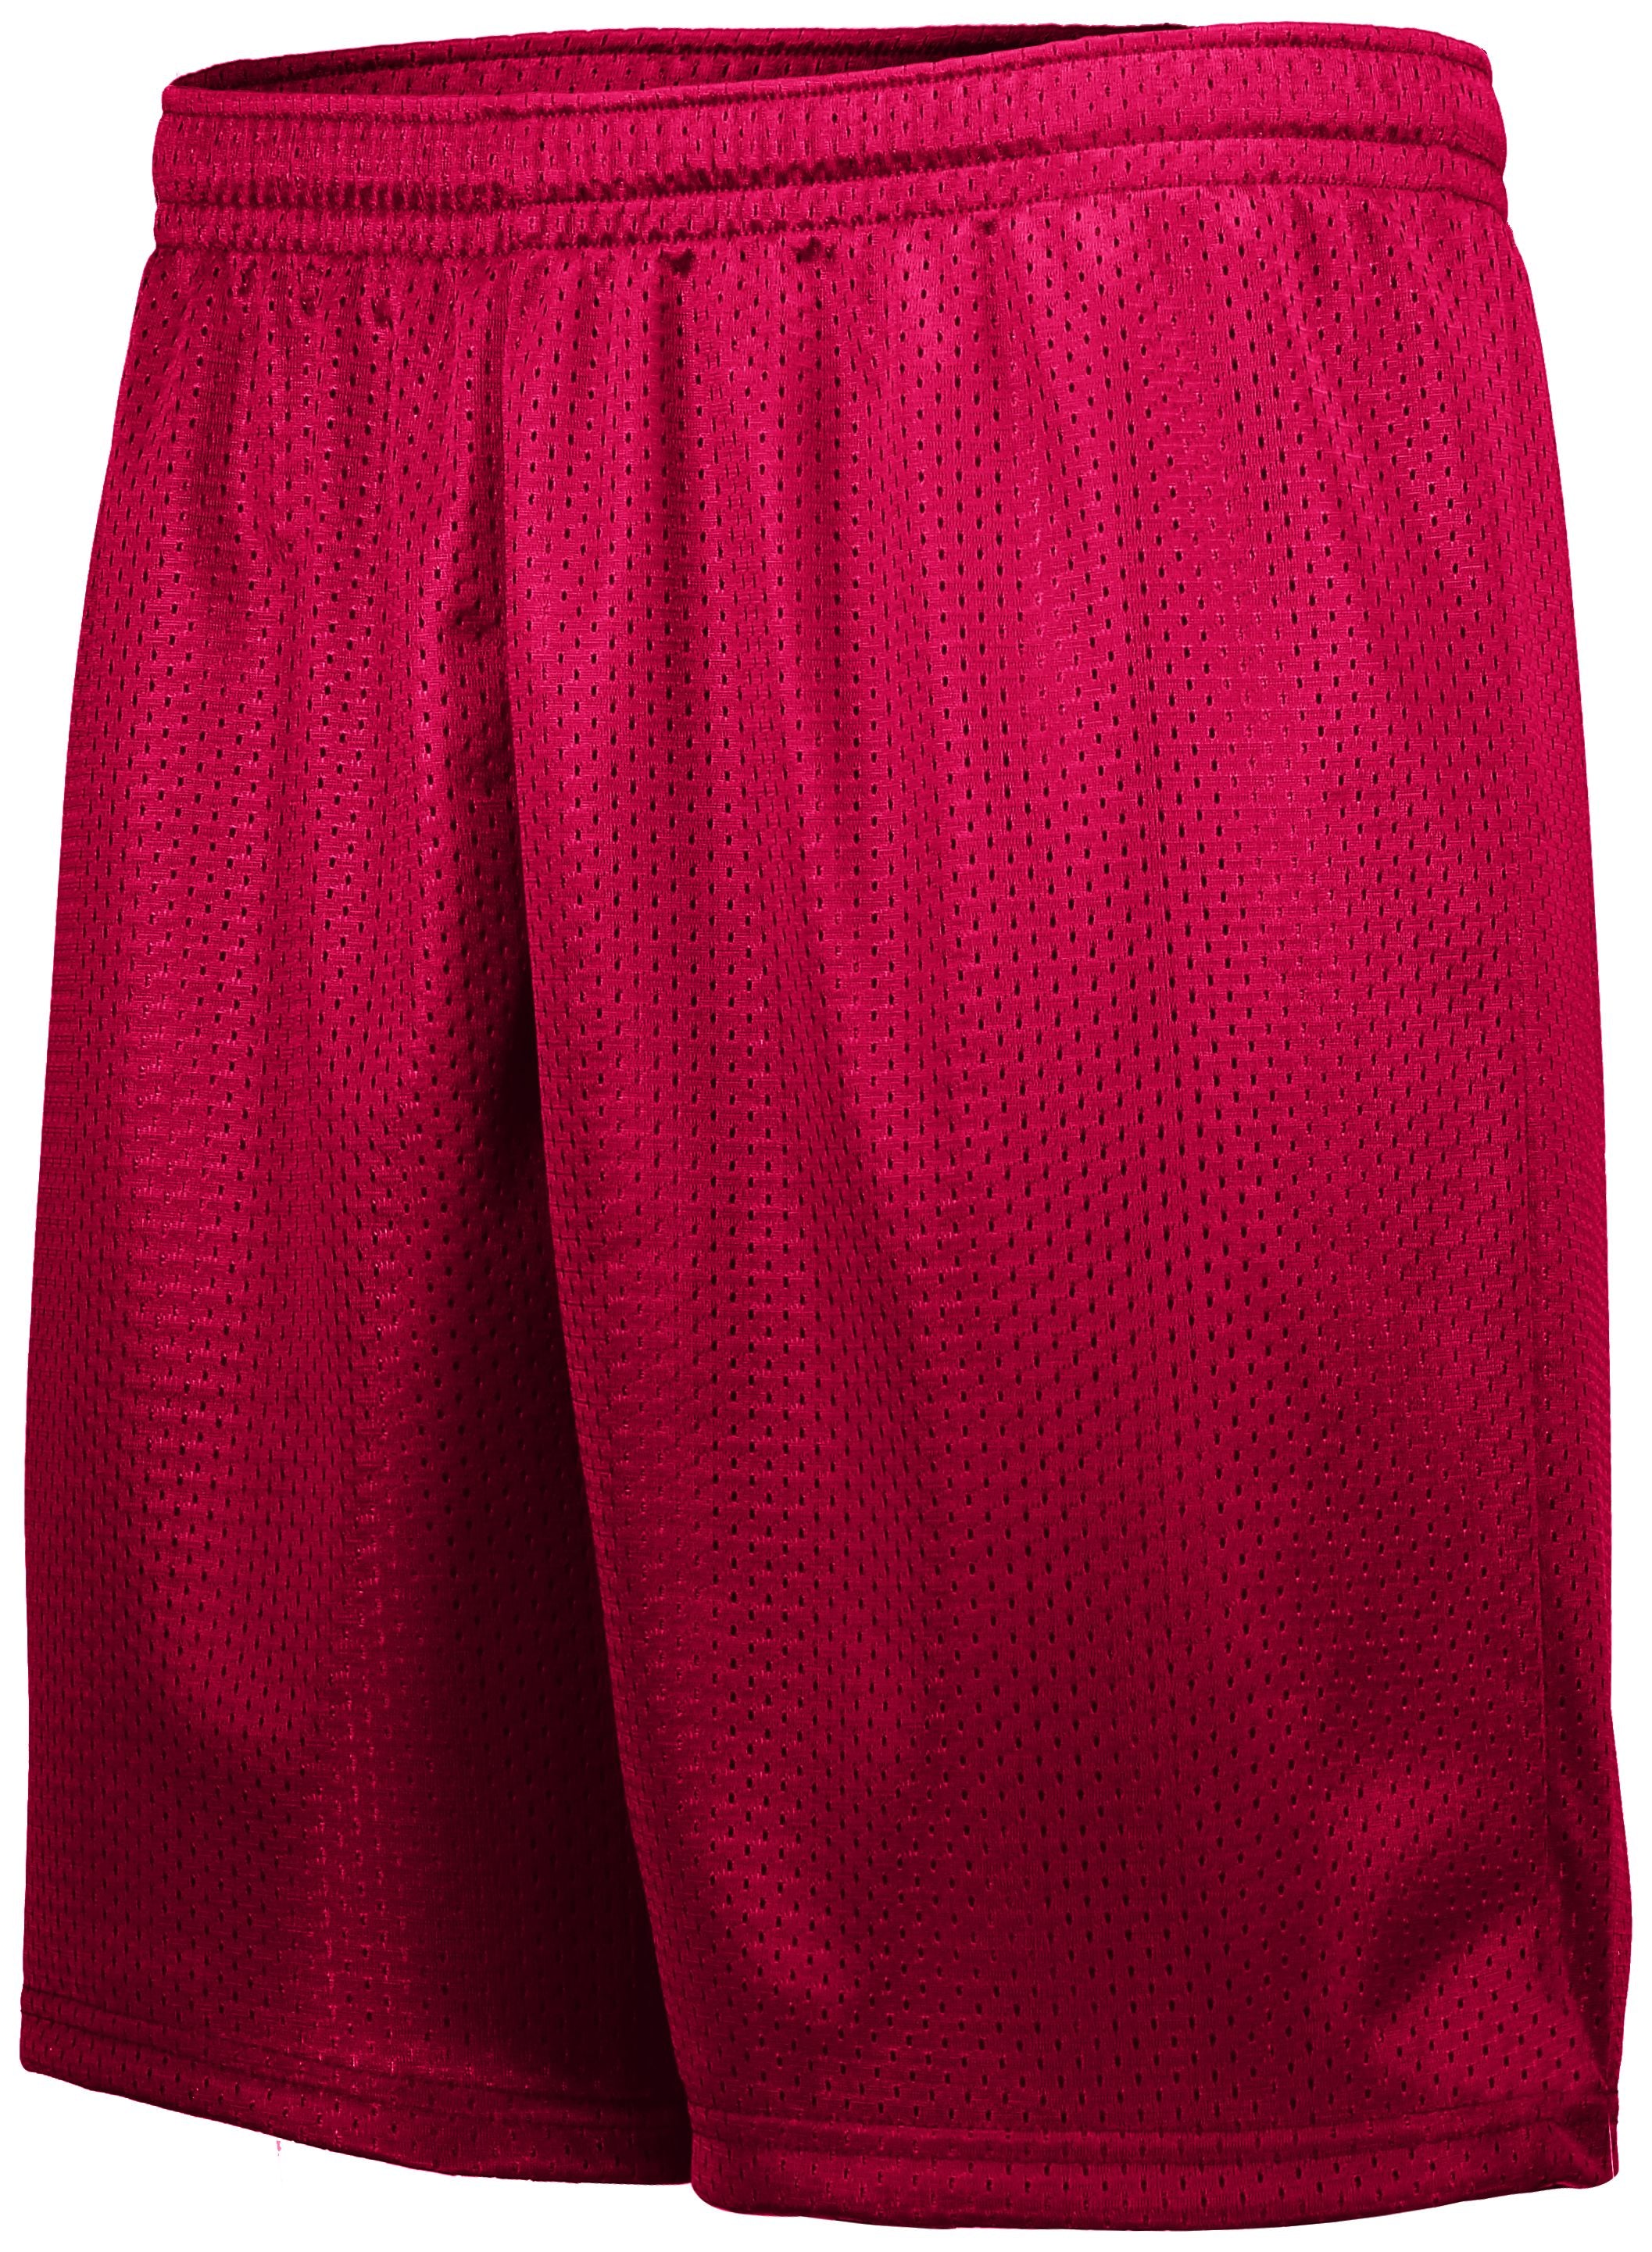 Augusta Sportswear Youth Tricot Mesh Shorts in Red  -Part of the Youth, Youth-Shorts, Augusta-Products product lines at KanaleyCreations.com